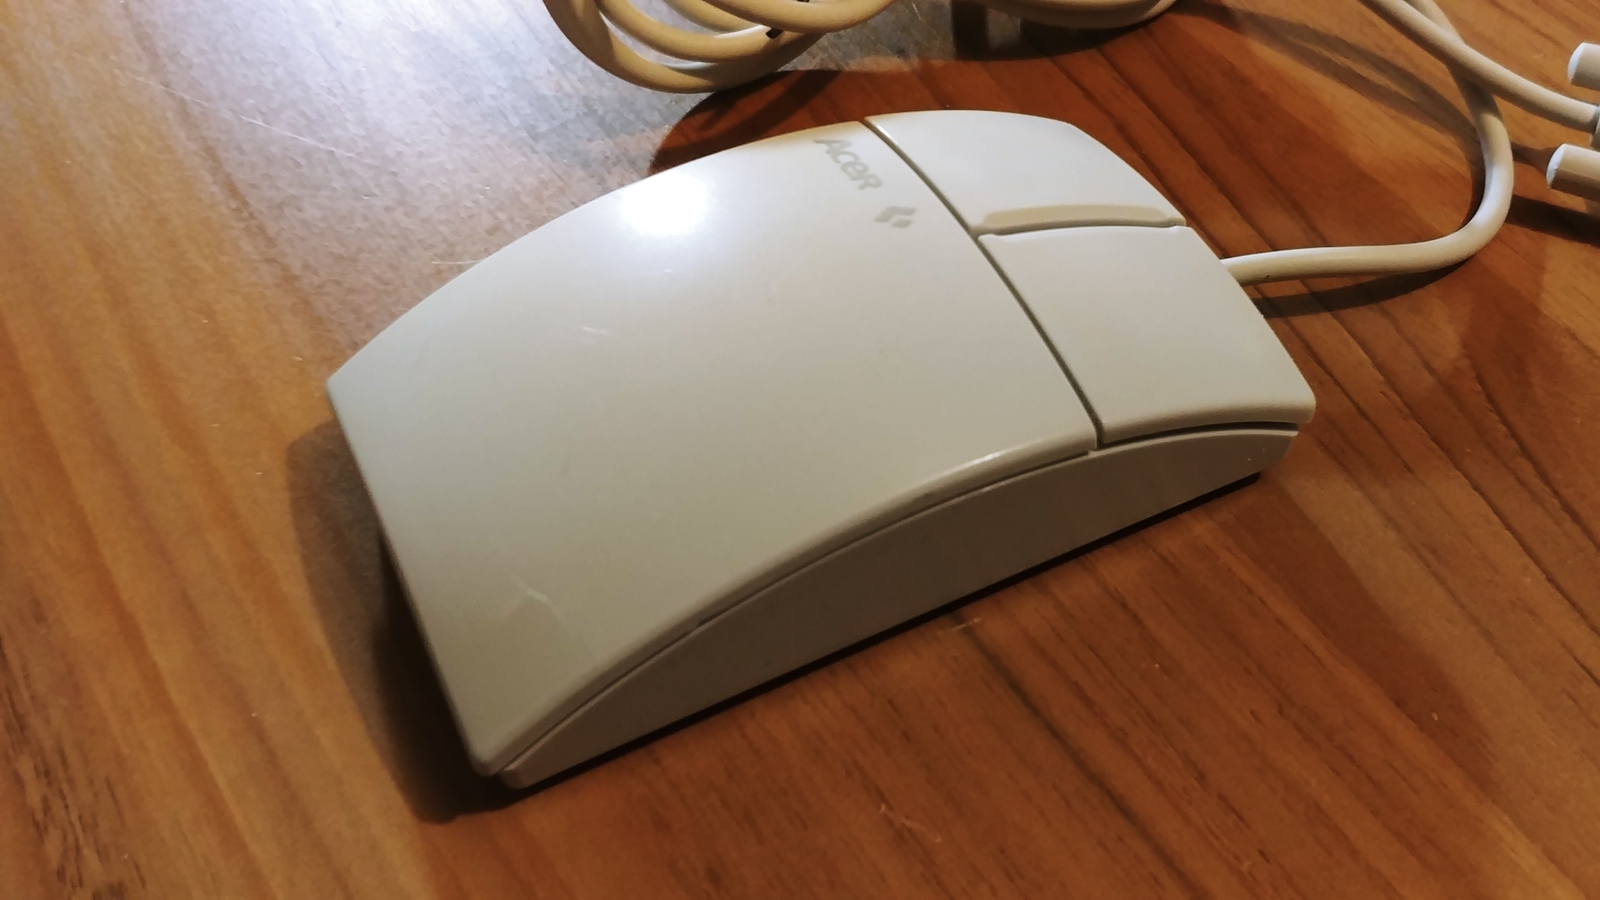 Acer serial mouse